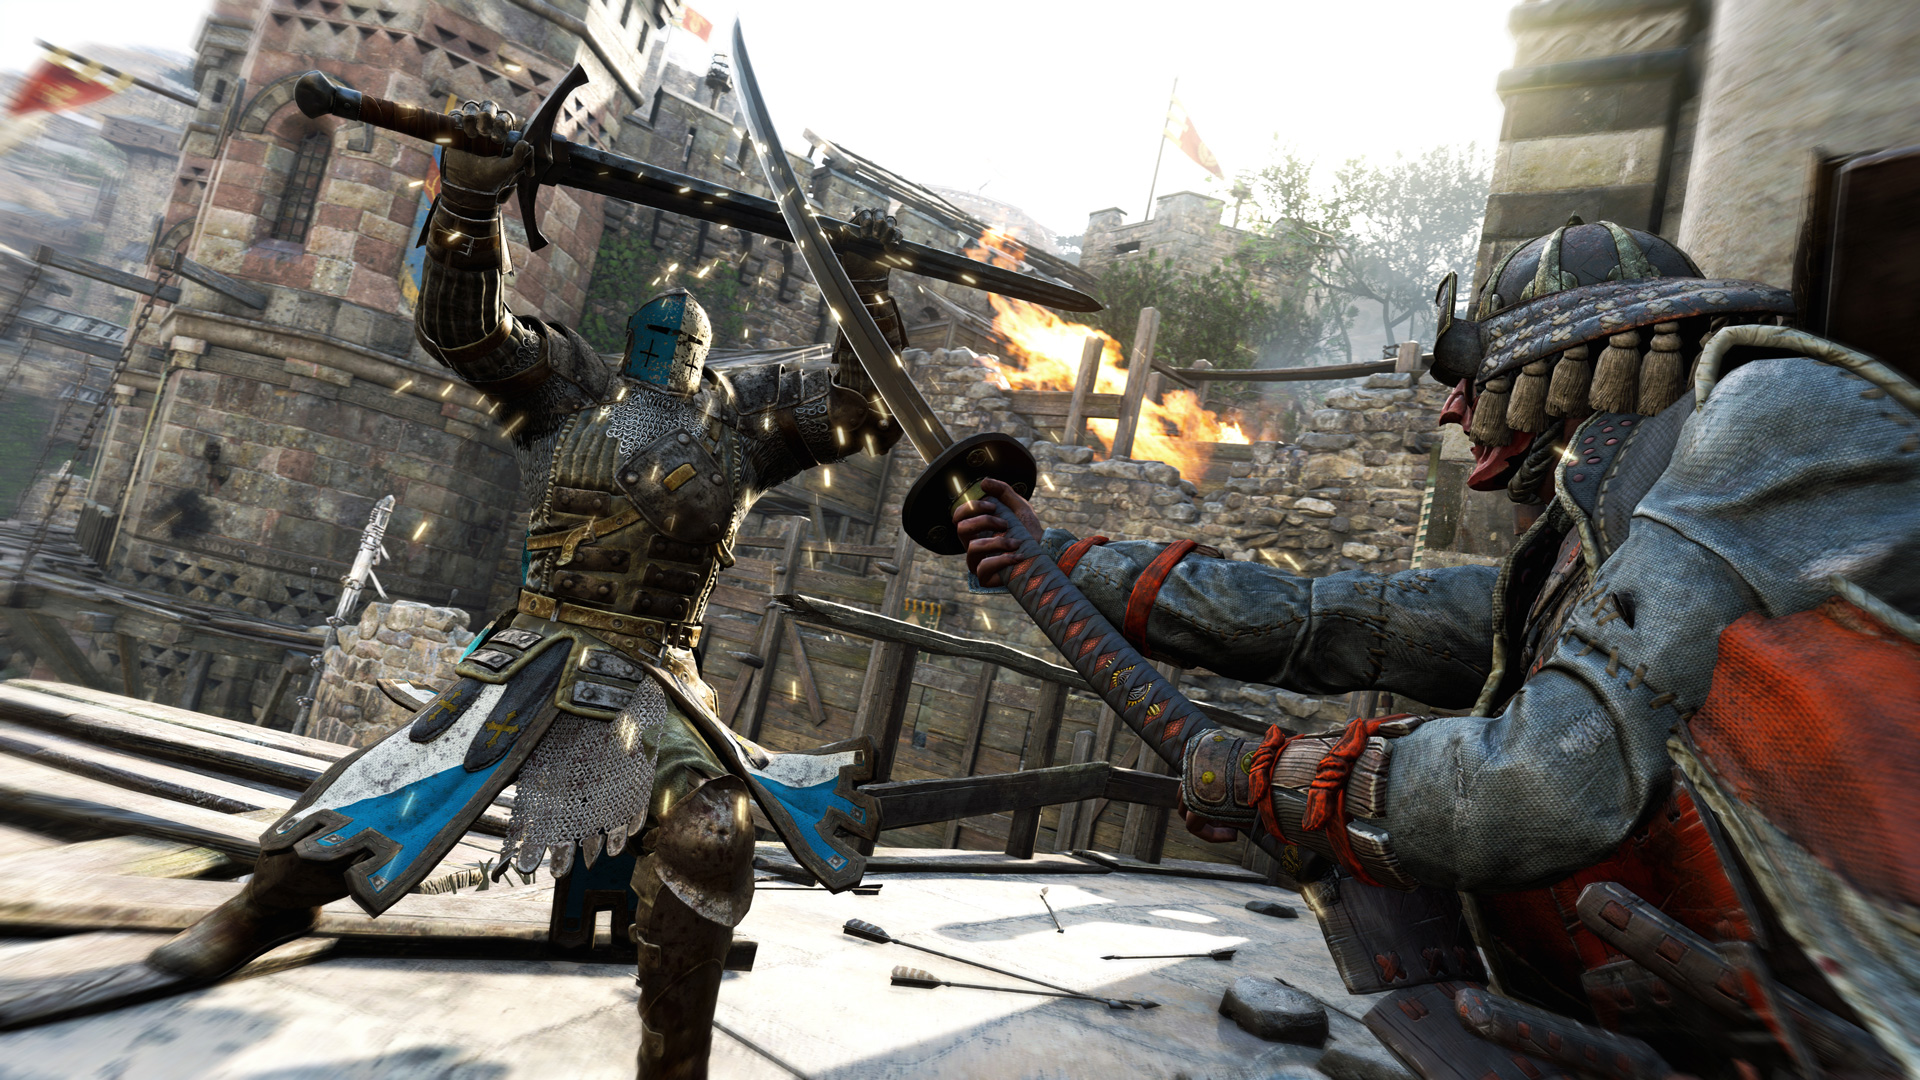 For Honor Ubisoft